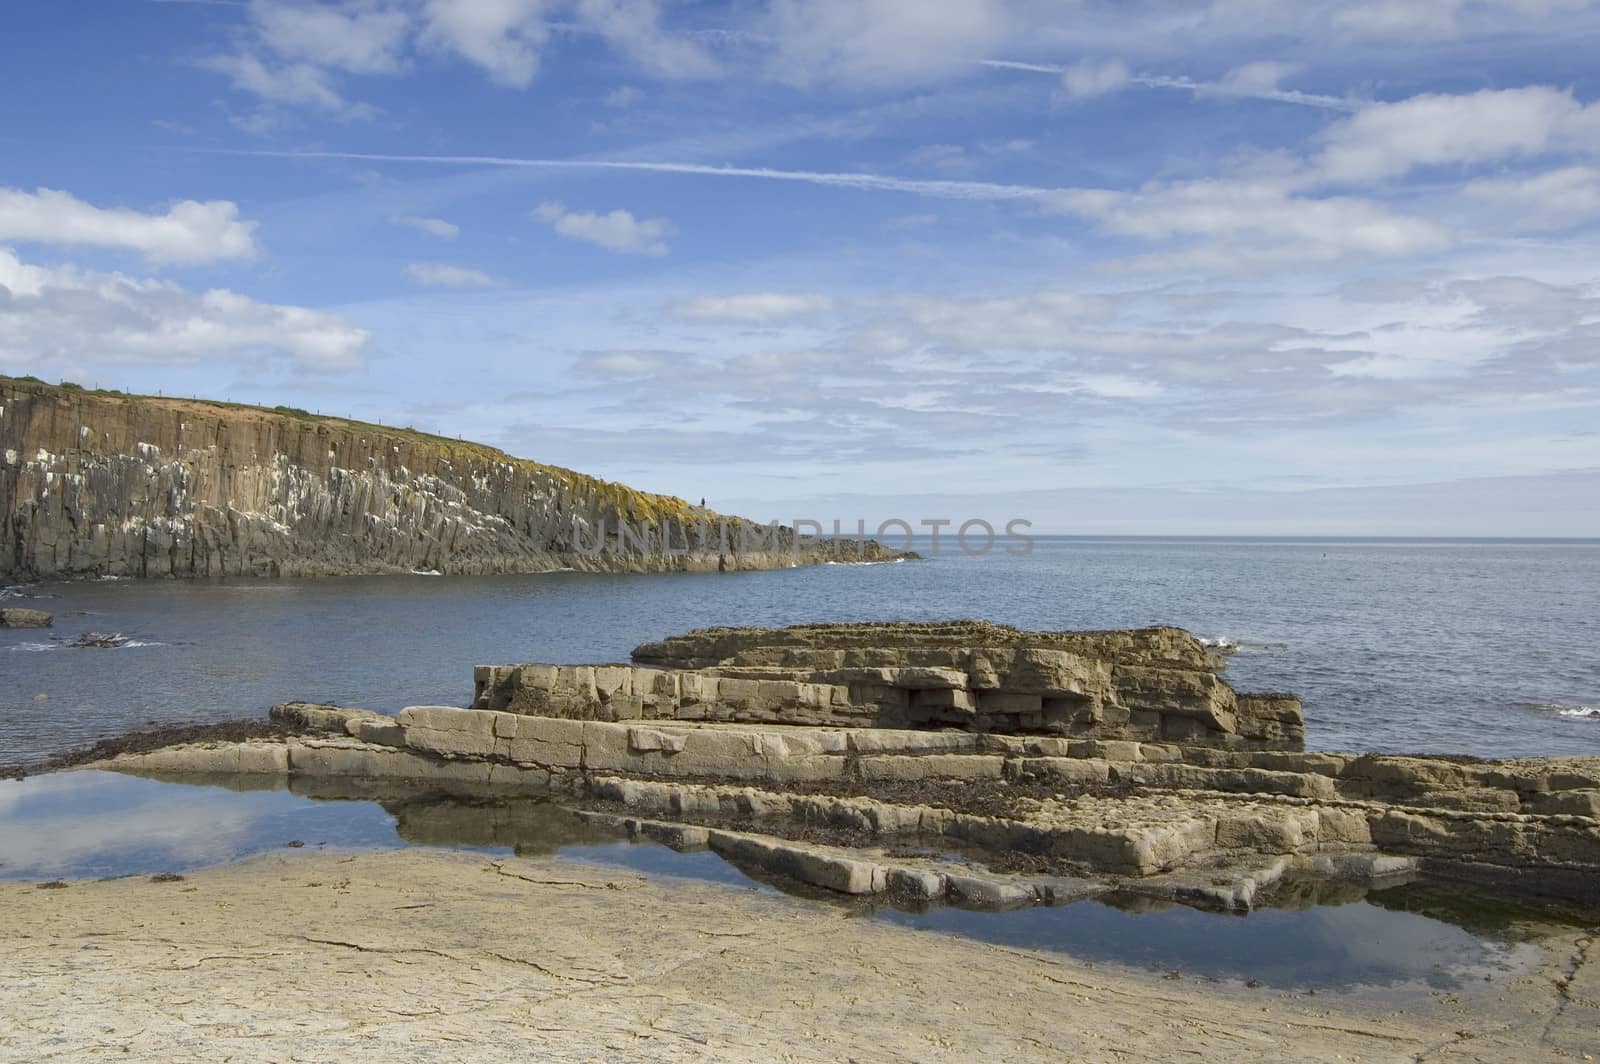 The rocky shore near Craster on the Northumbrian coast, looking out over the North Sea